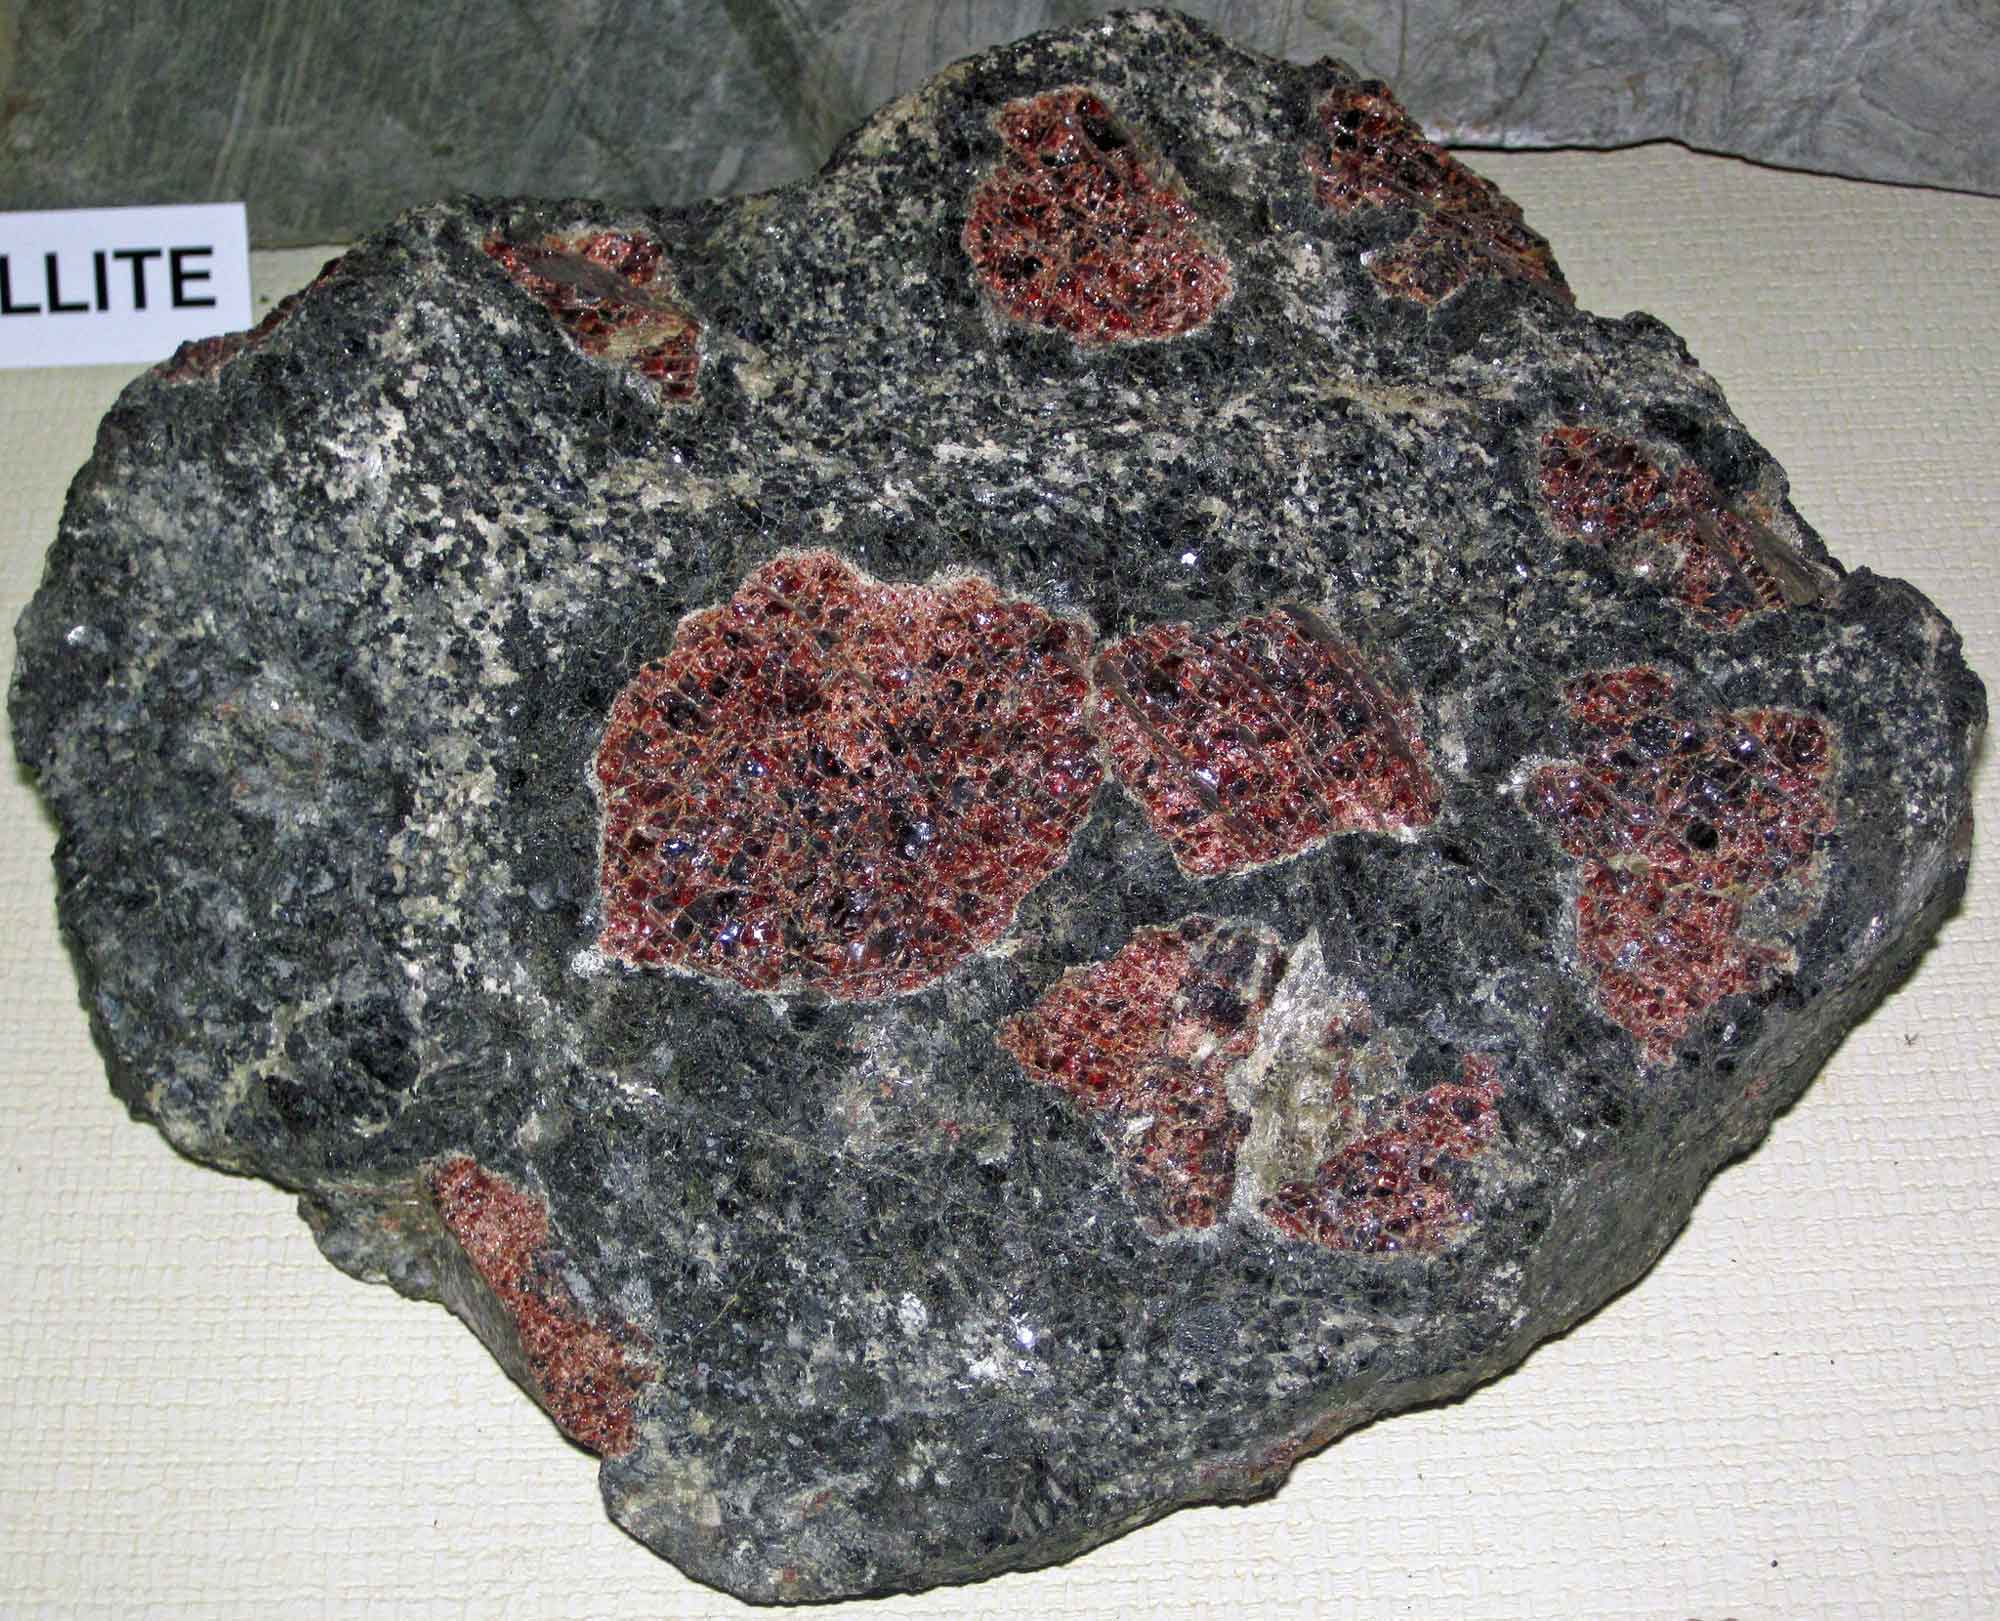 Photograph of a rock containing large garnets from Gore Mountain, New York